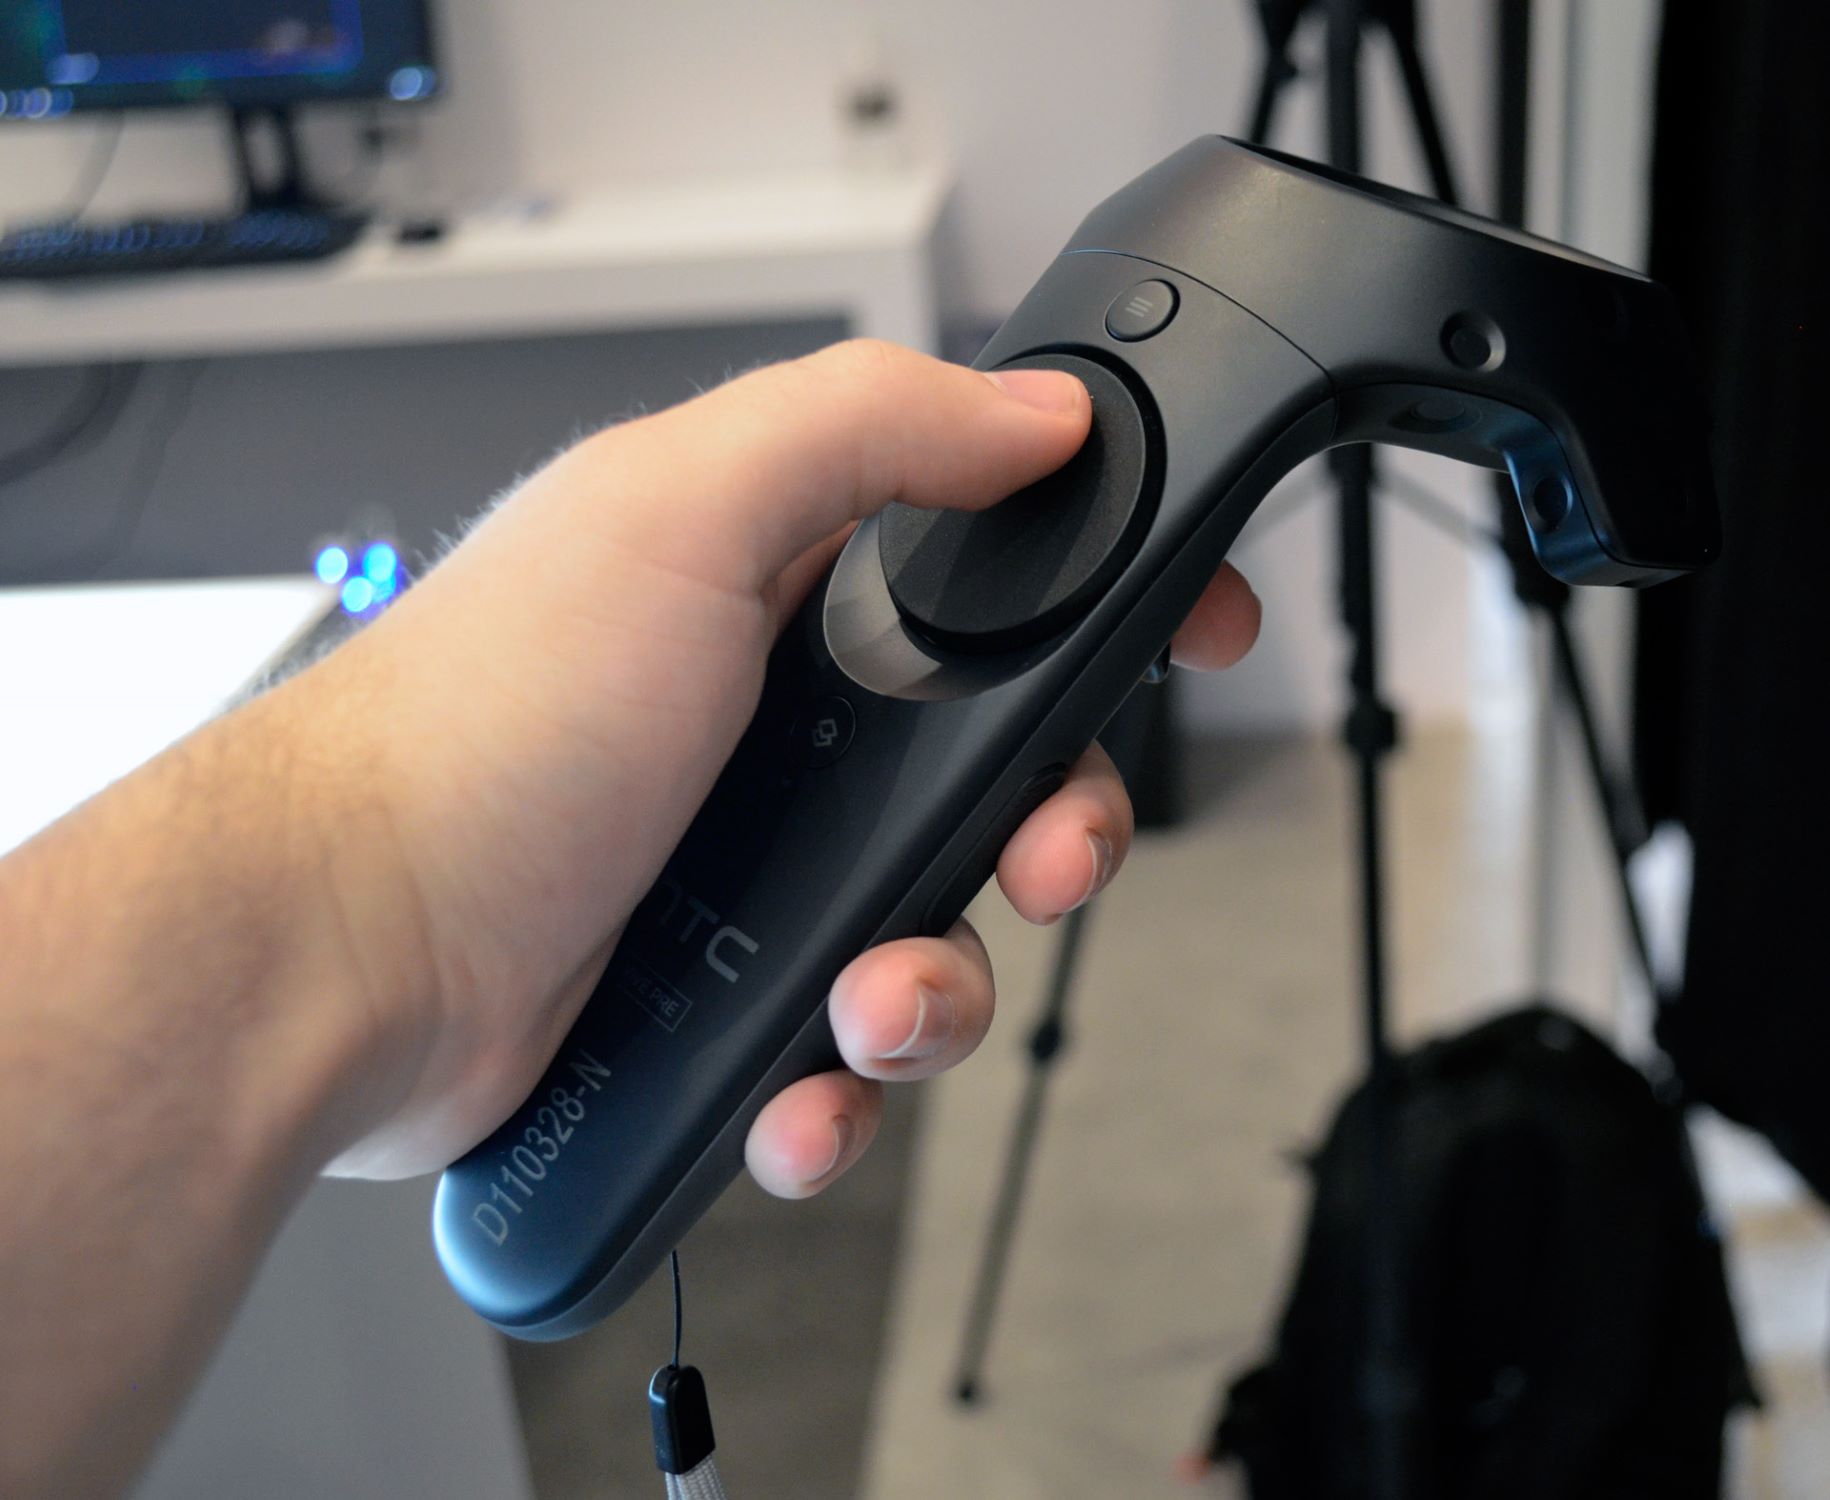 When Will HTC Vive Have New Controllers